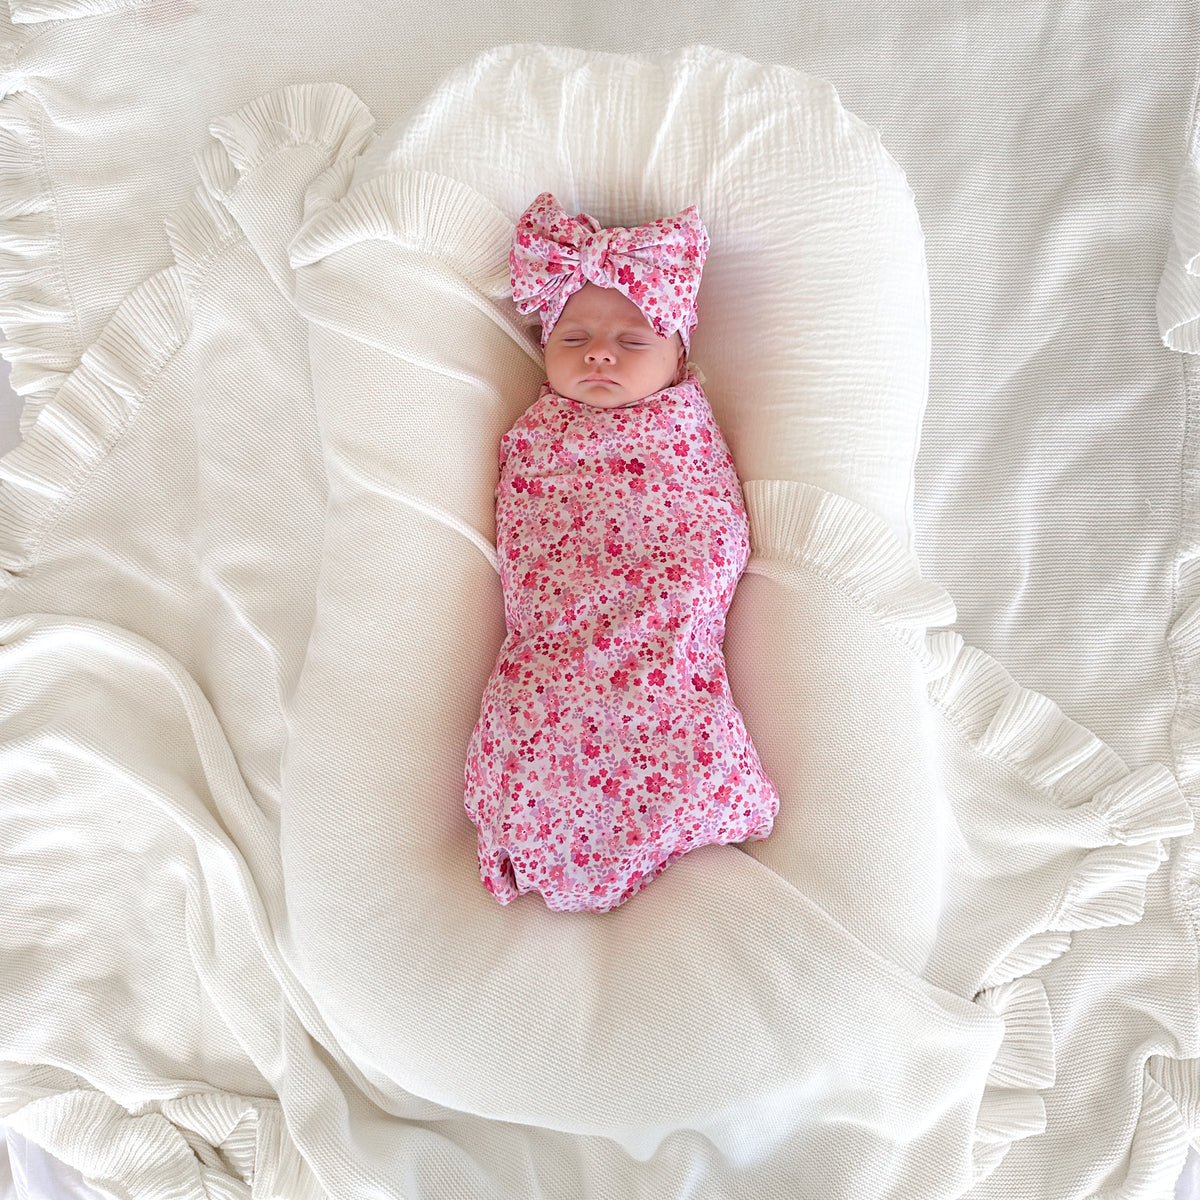 Floral Baby Wrap - Maddison